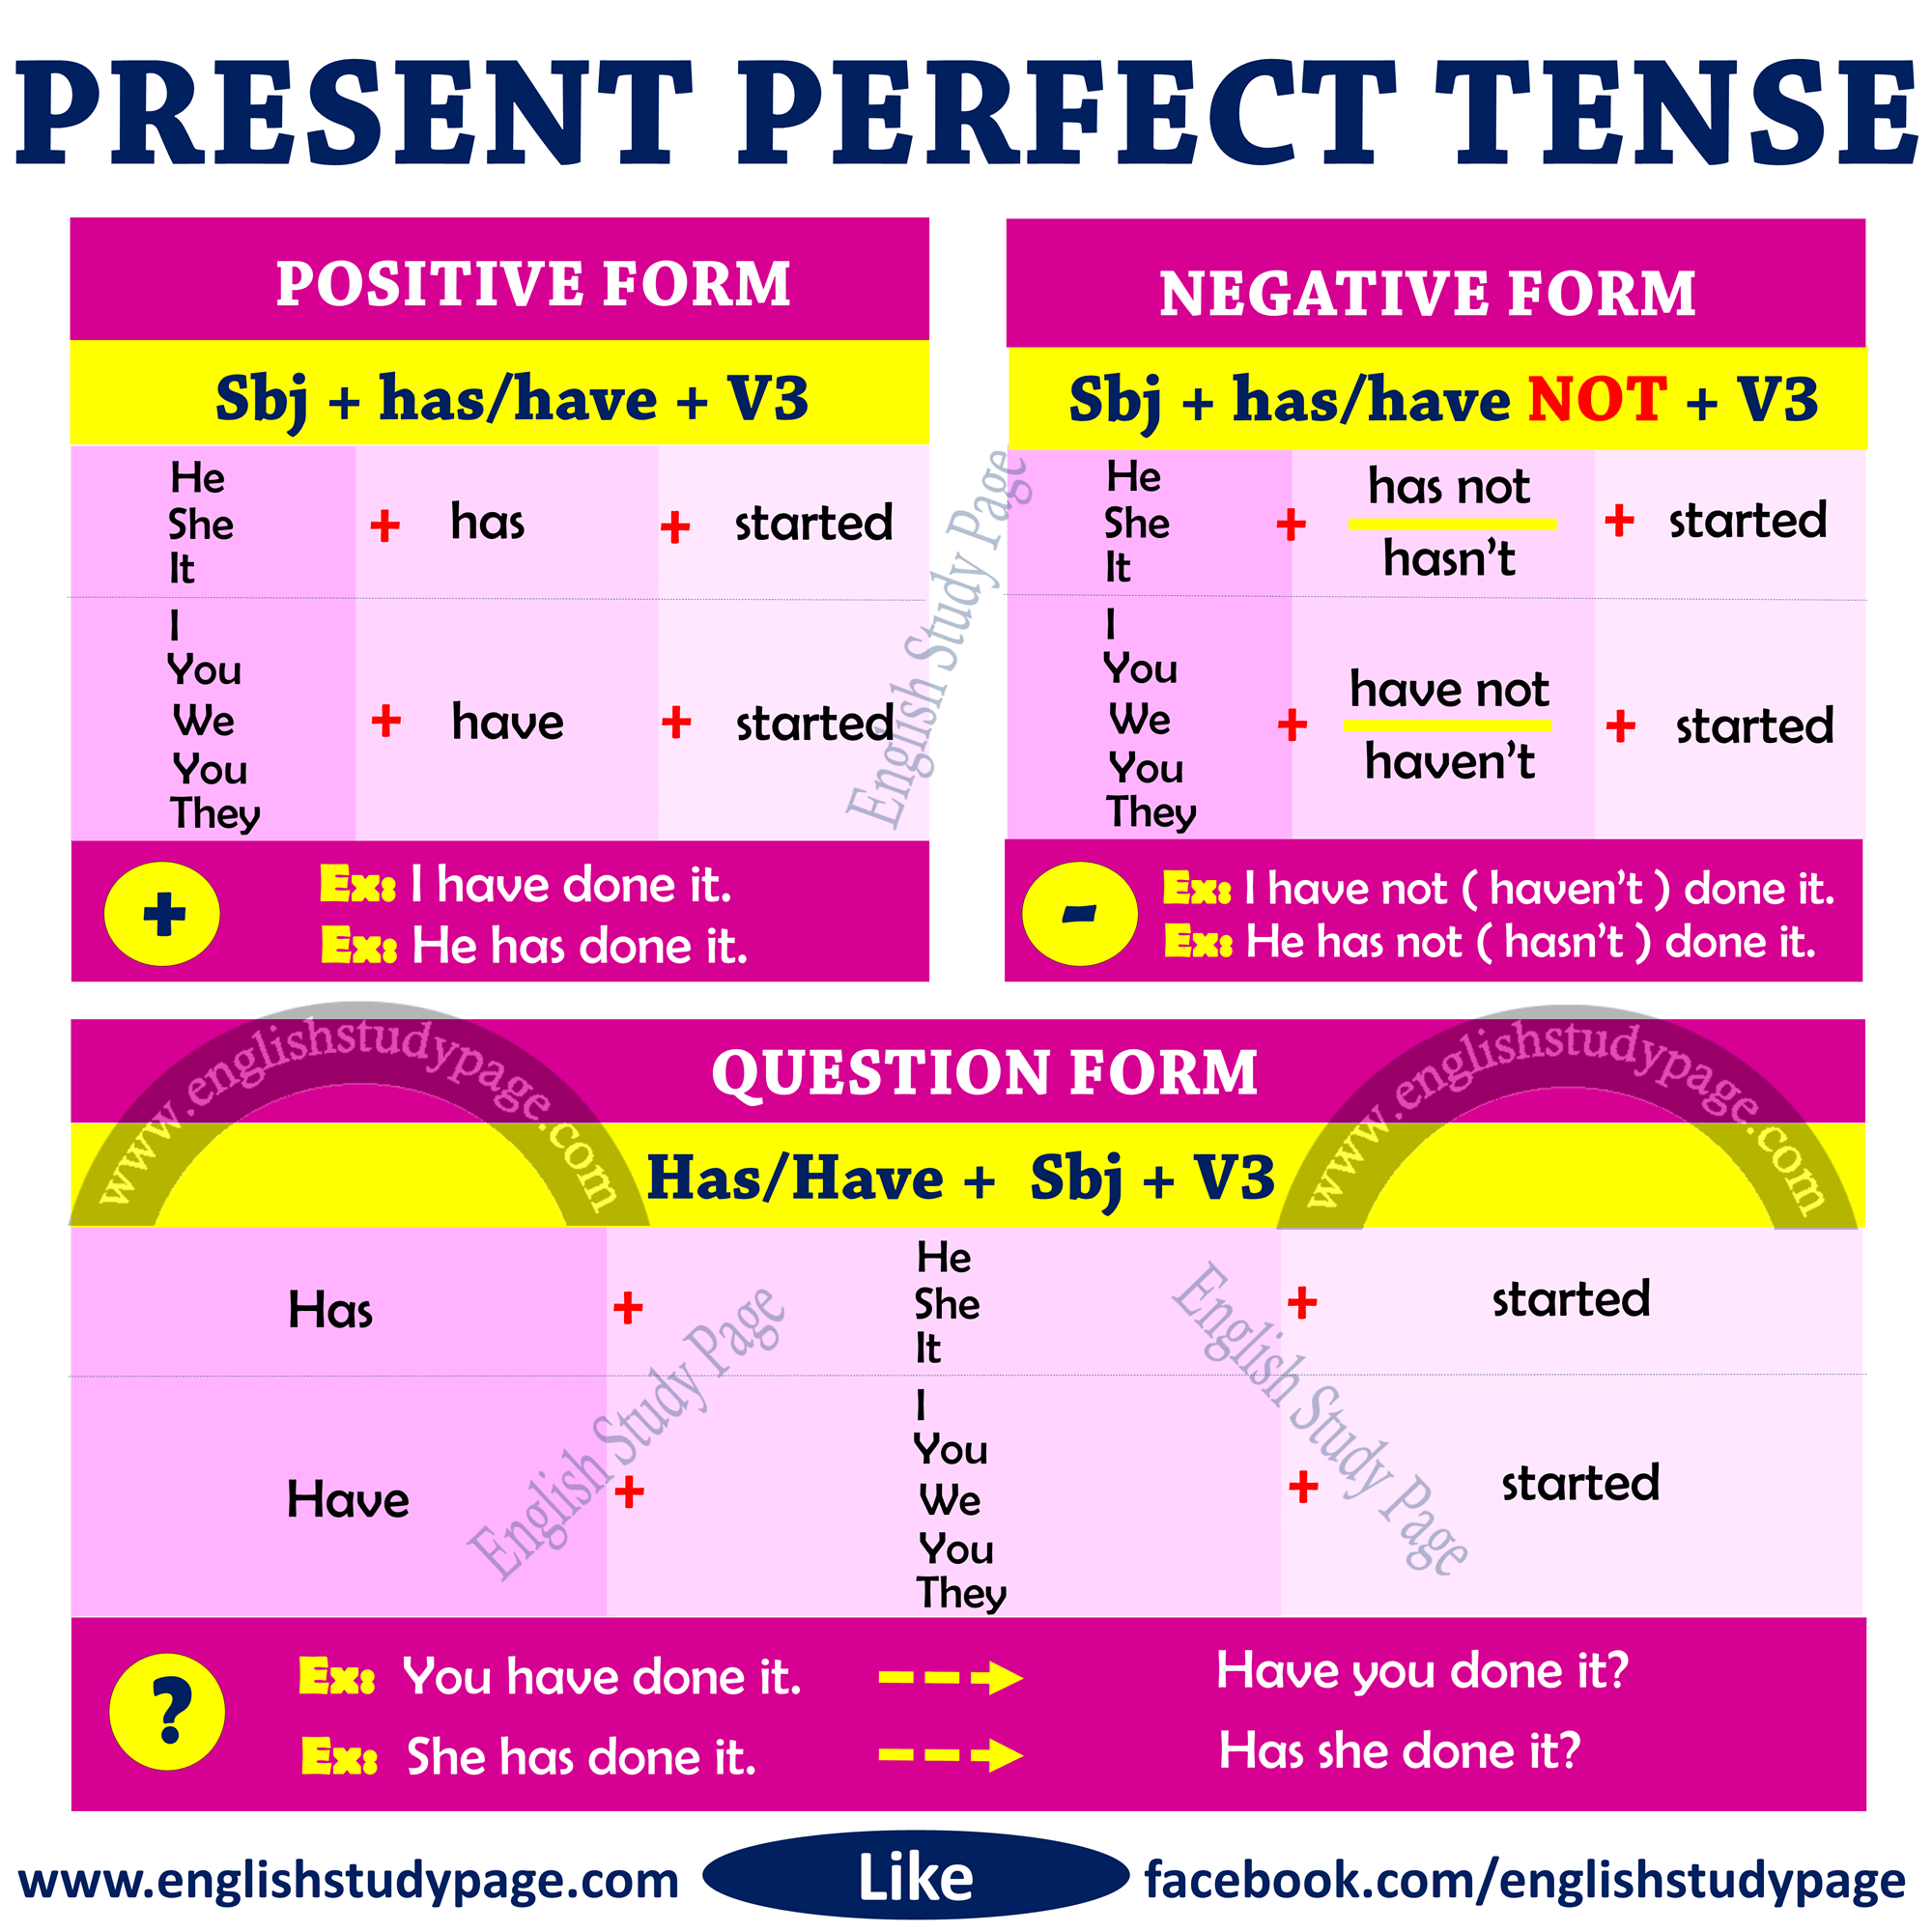 Structure of Present Perfect Tense